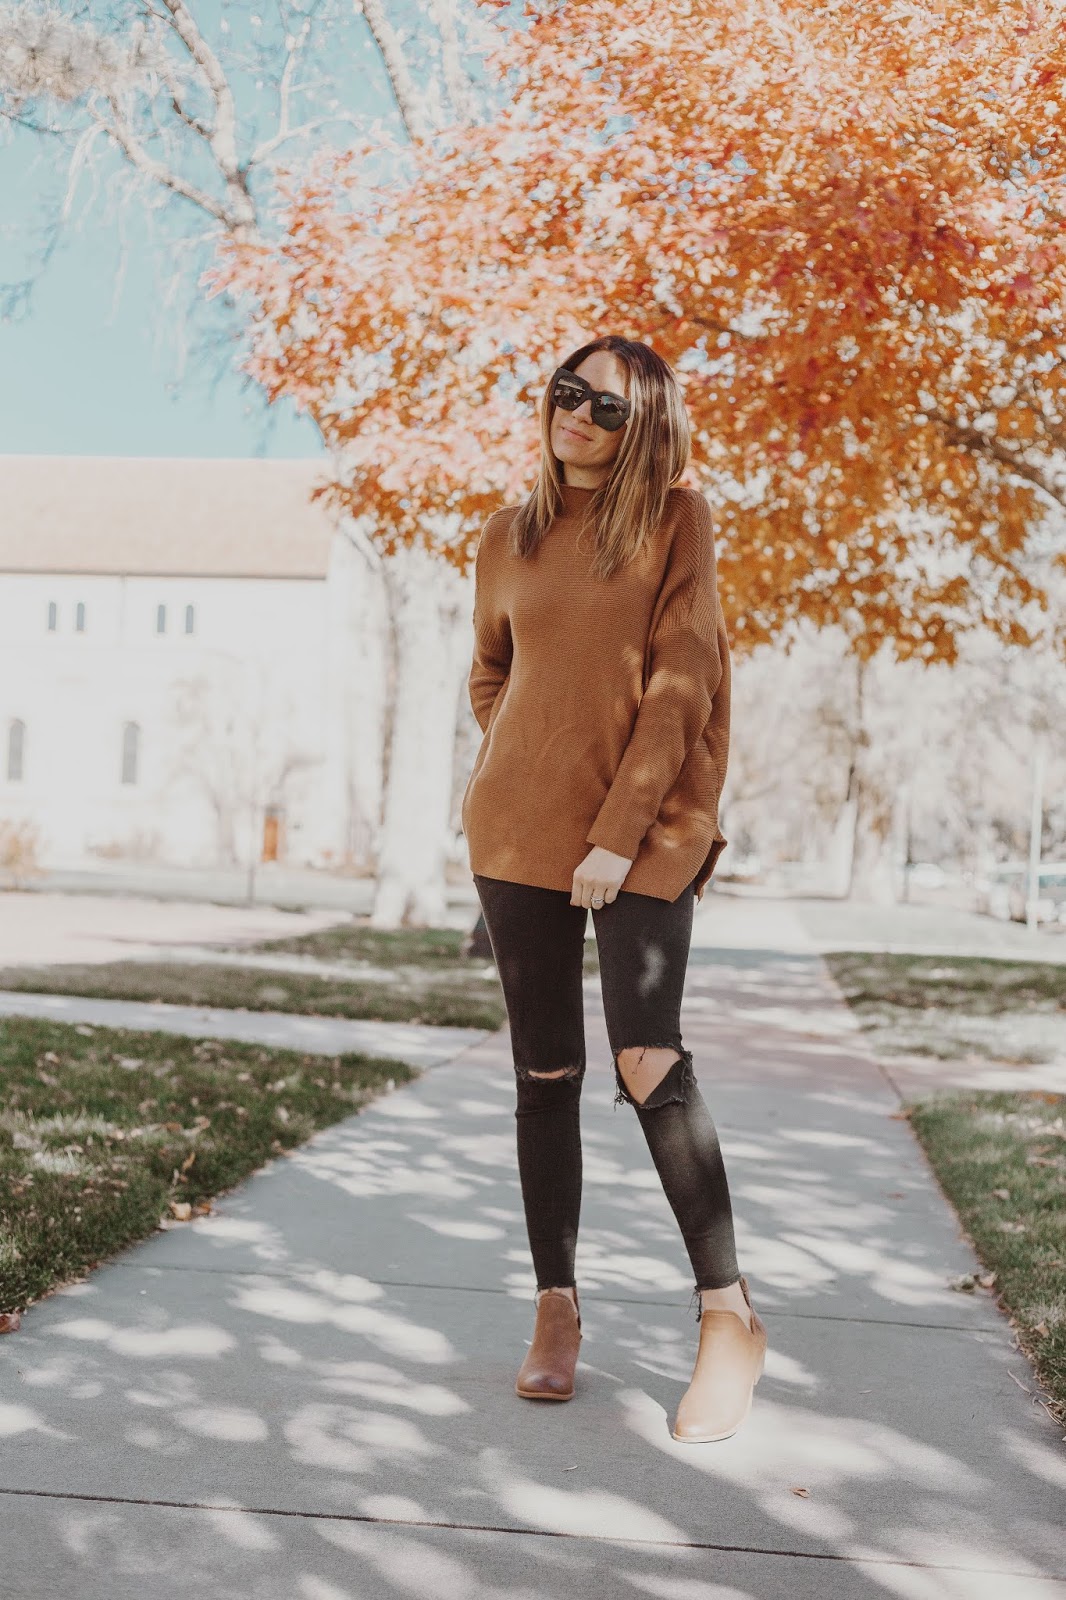 Thanksgiving Outfit Ideas That Are So Warm And Cute